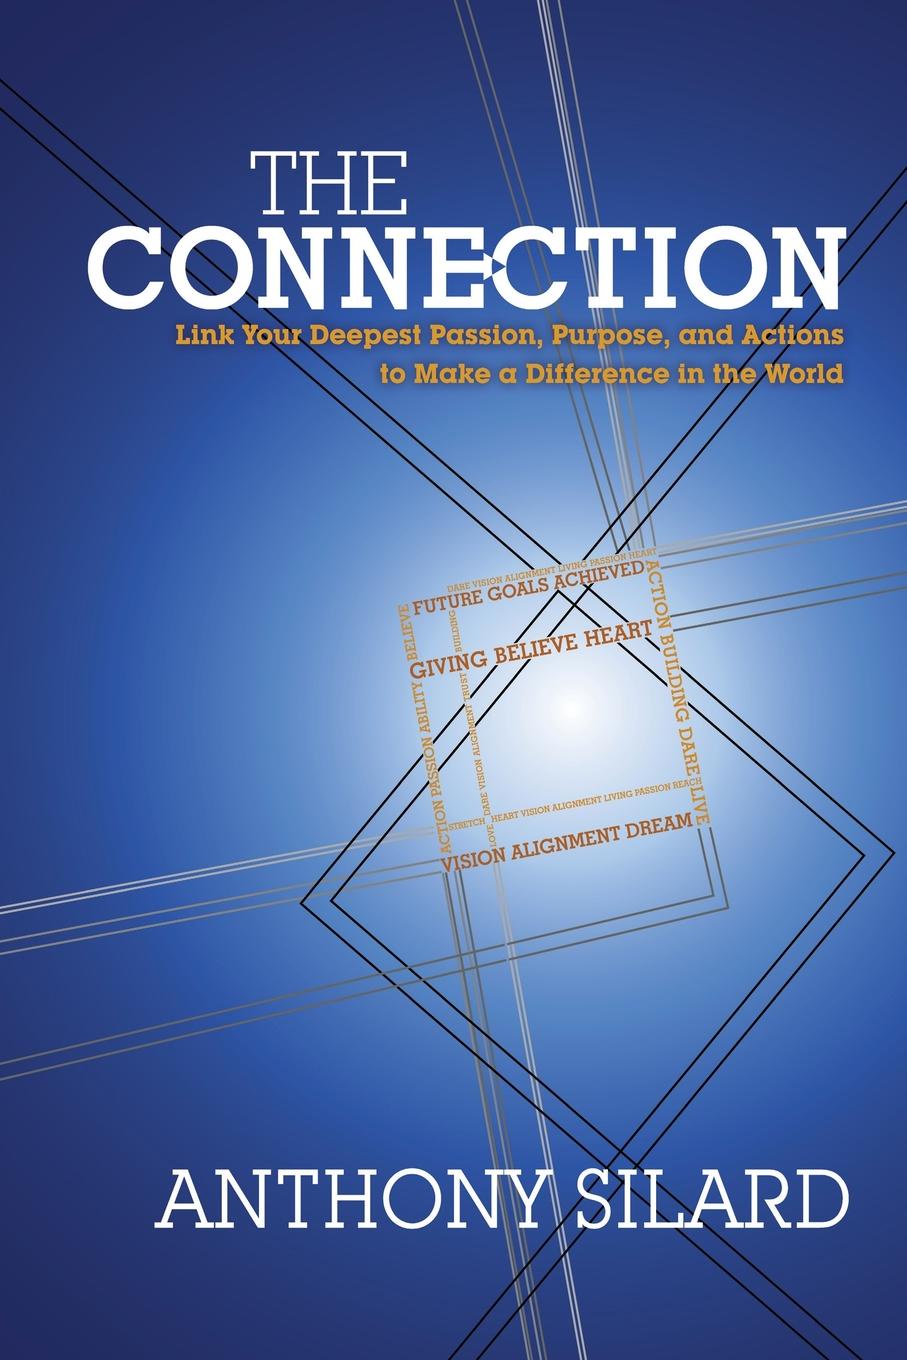 Connection. Link Your Deepest Passion, Purpose, and Actions to Make a Difference in the World (New)